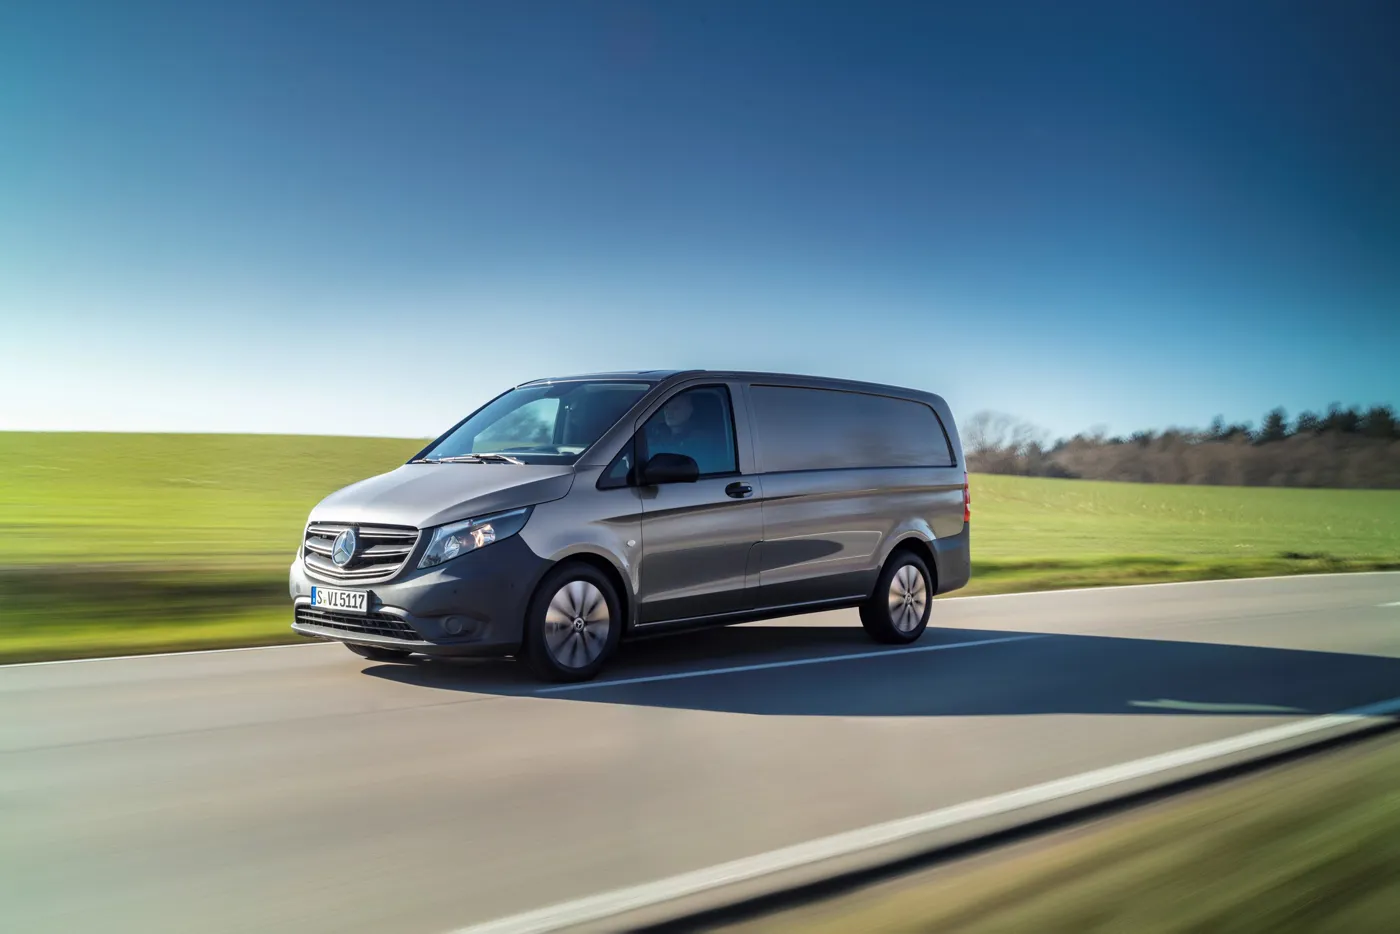 Mercedes-Benz Vito 2019 – new engines and tech revealed